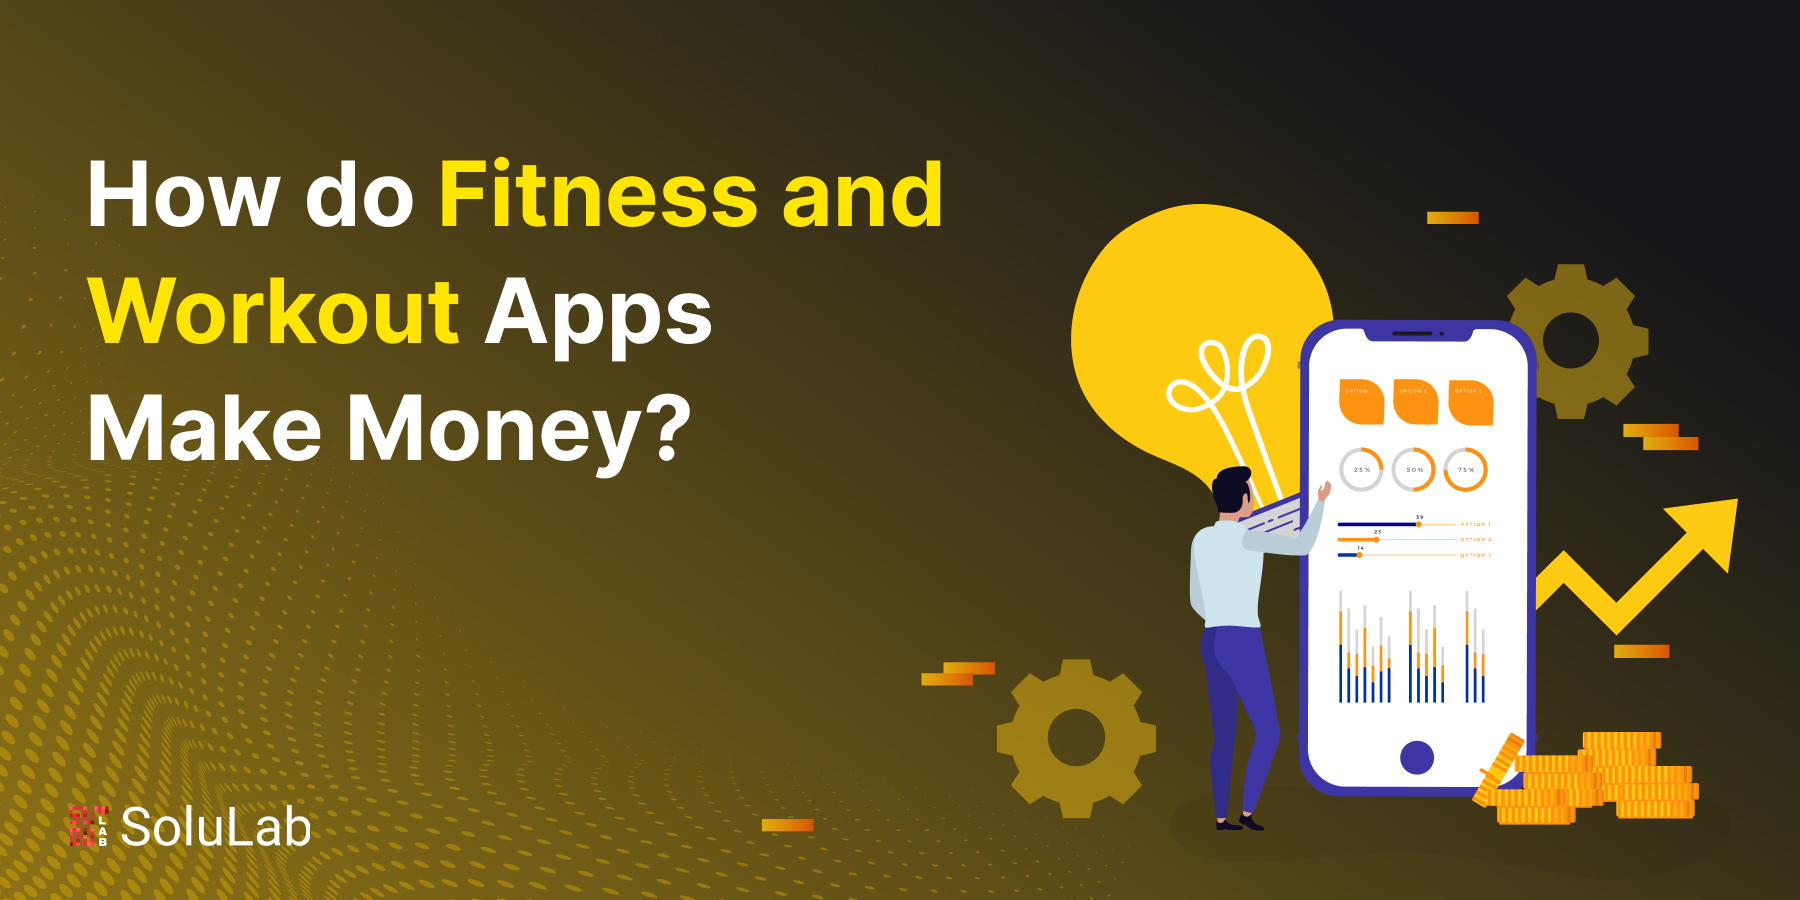 How Do Fitness And Workout Apps Make Money?